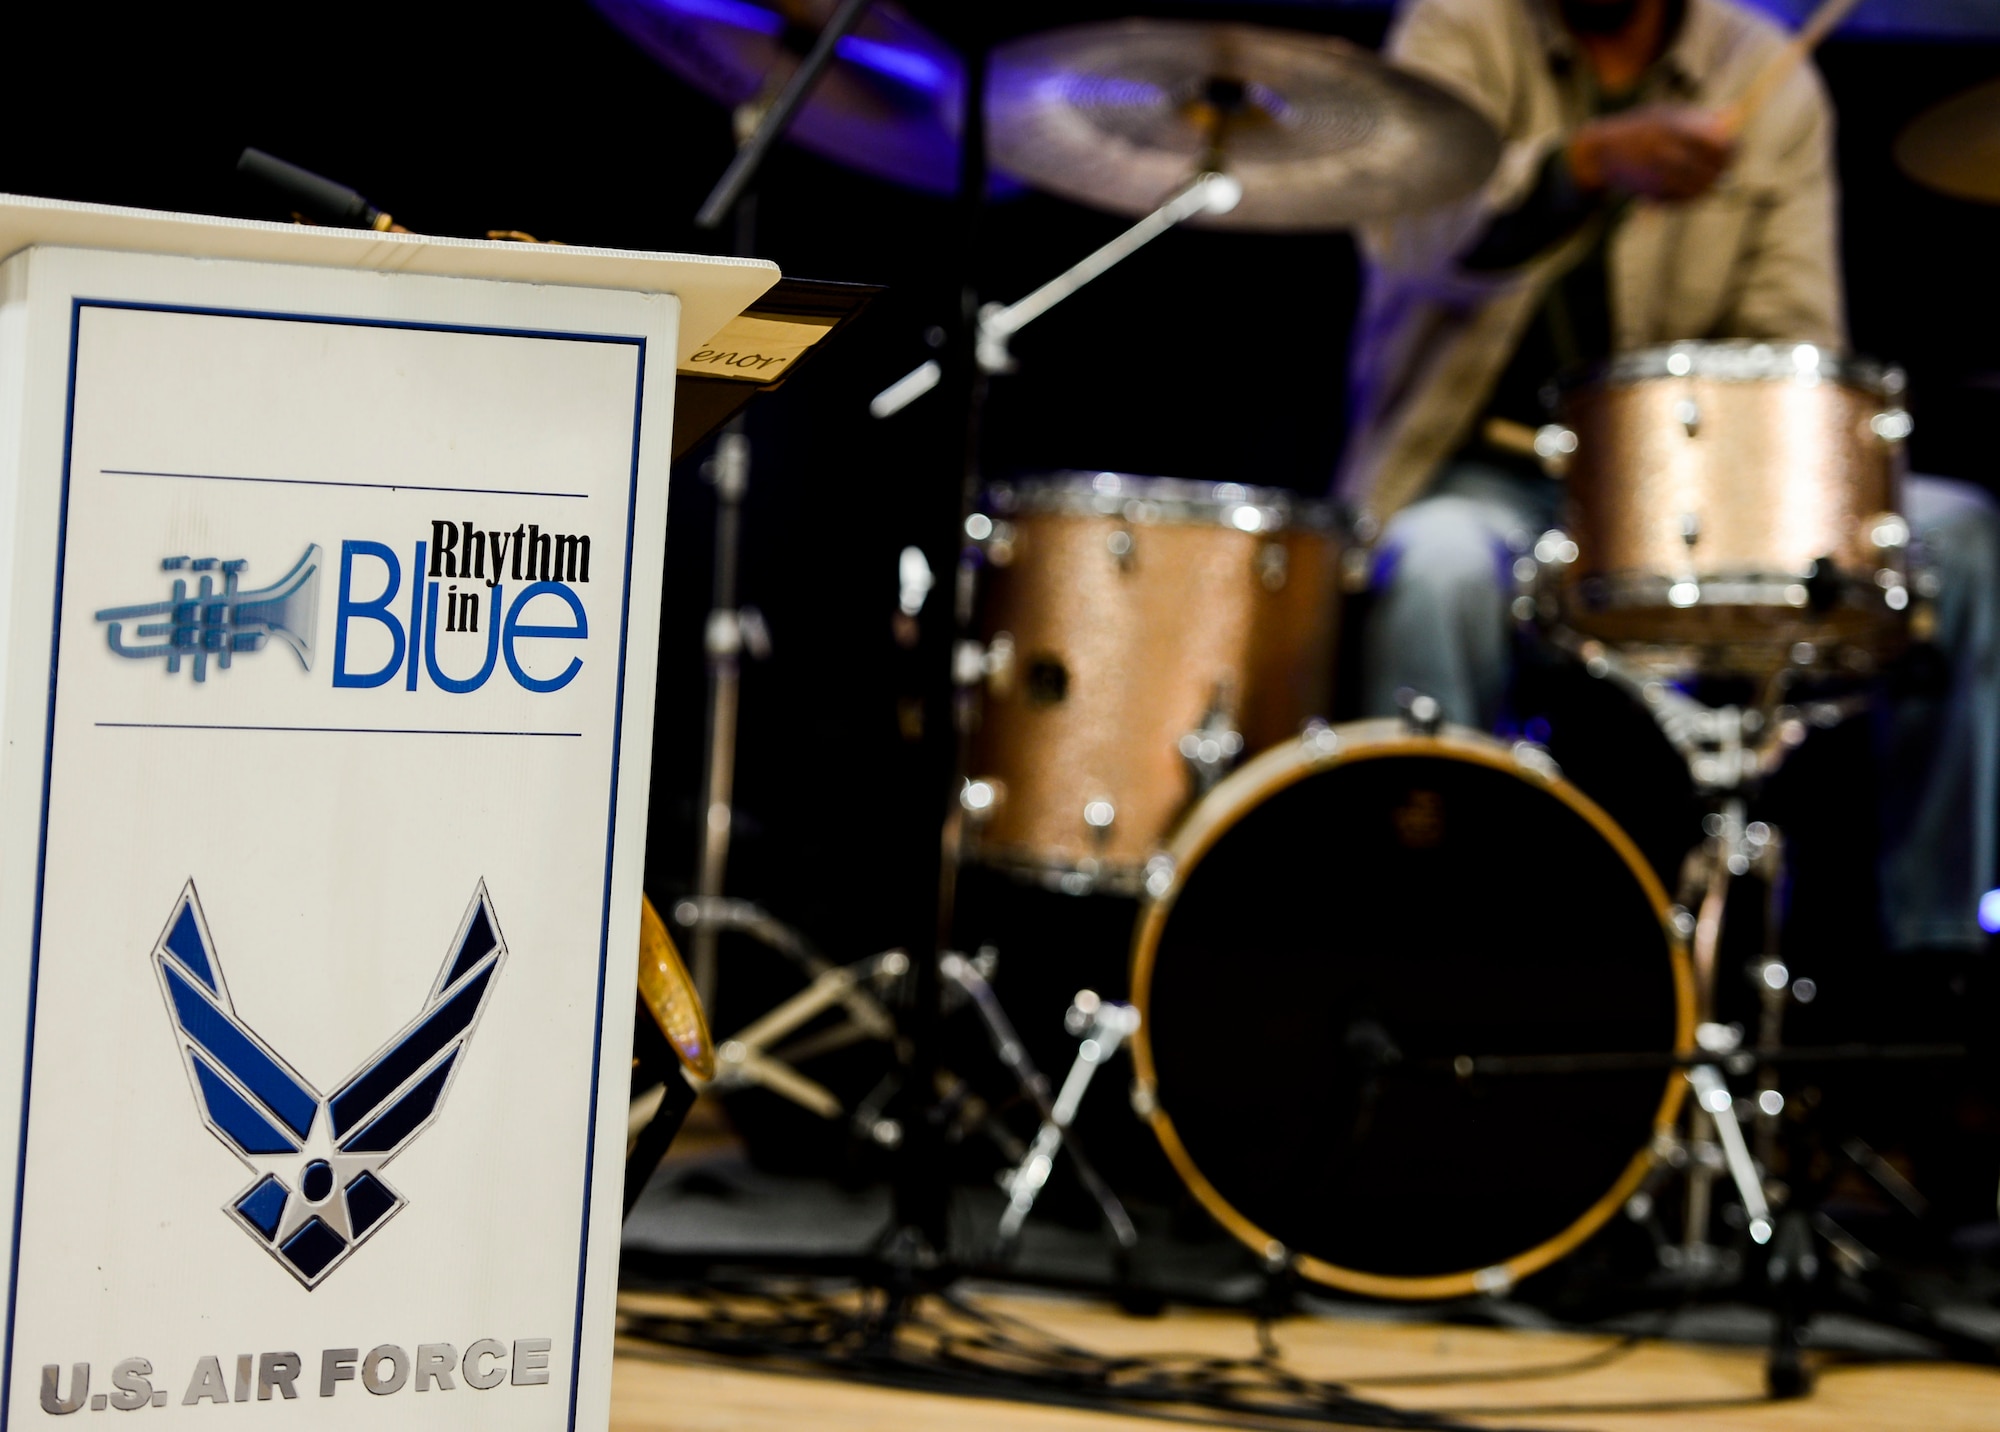 The U.S. Air Force Heritage of America “Rhythm in Blue” jazz ensemble hosted Harry Connick Jr. and his band at Langley Air Force Base, Va., Feb. 23, 2015. Connick Jr., an “American Idol” judge, listened to the ensemble’s performance, performed with his band and then answered questions from U.S. Army, Navy and Air Force Service member-musicians in attendance. (U.S. Air Force photo by Senior Airman Kayla Newman/Released)